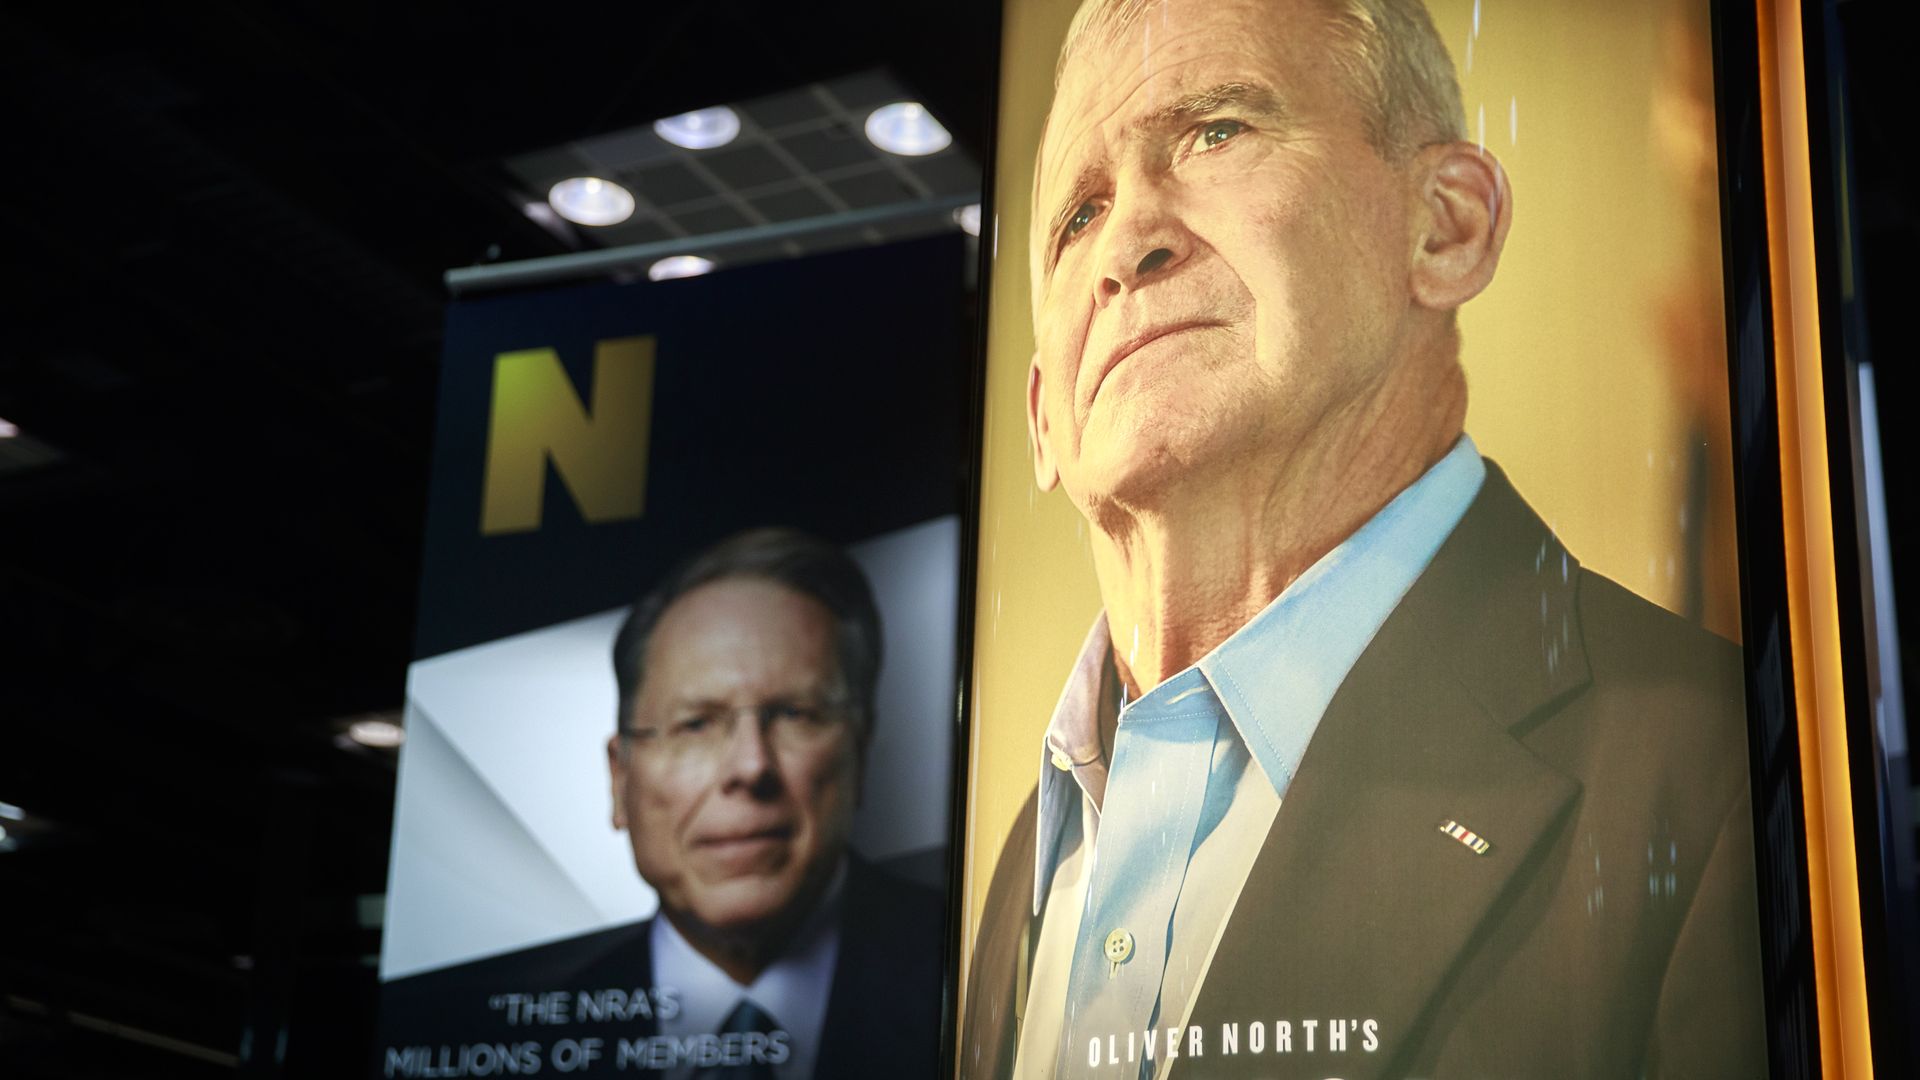 Photos of NRA Chief Executive and Executive Vice President Wayne LaPierre (L) and former president of the NRA Oliver North.